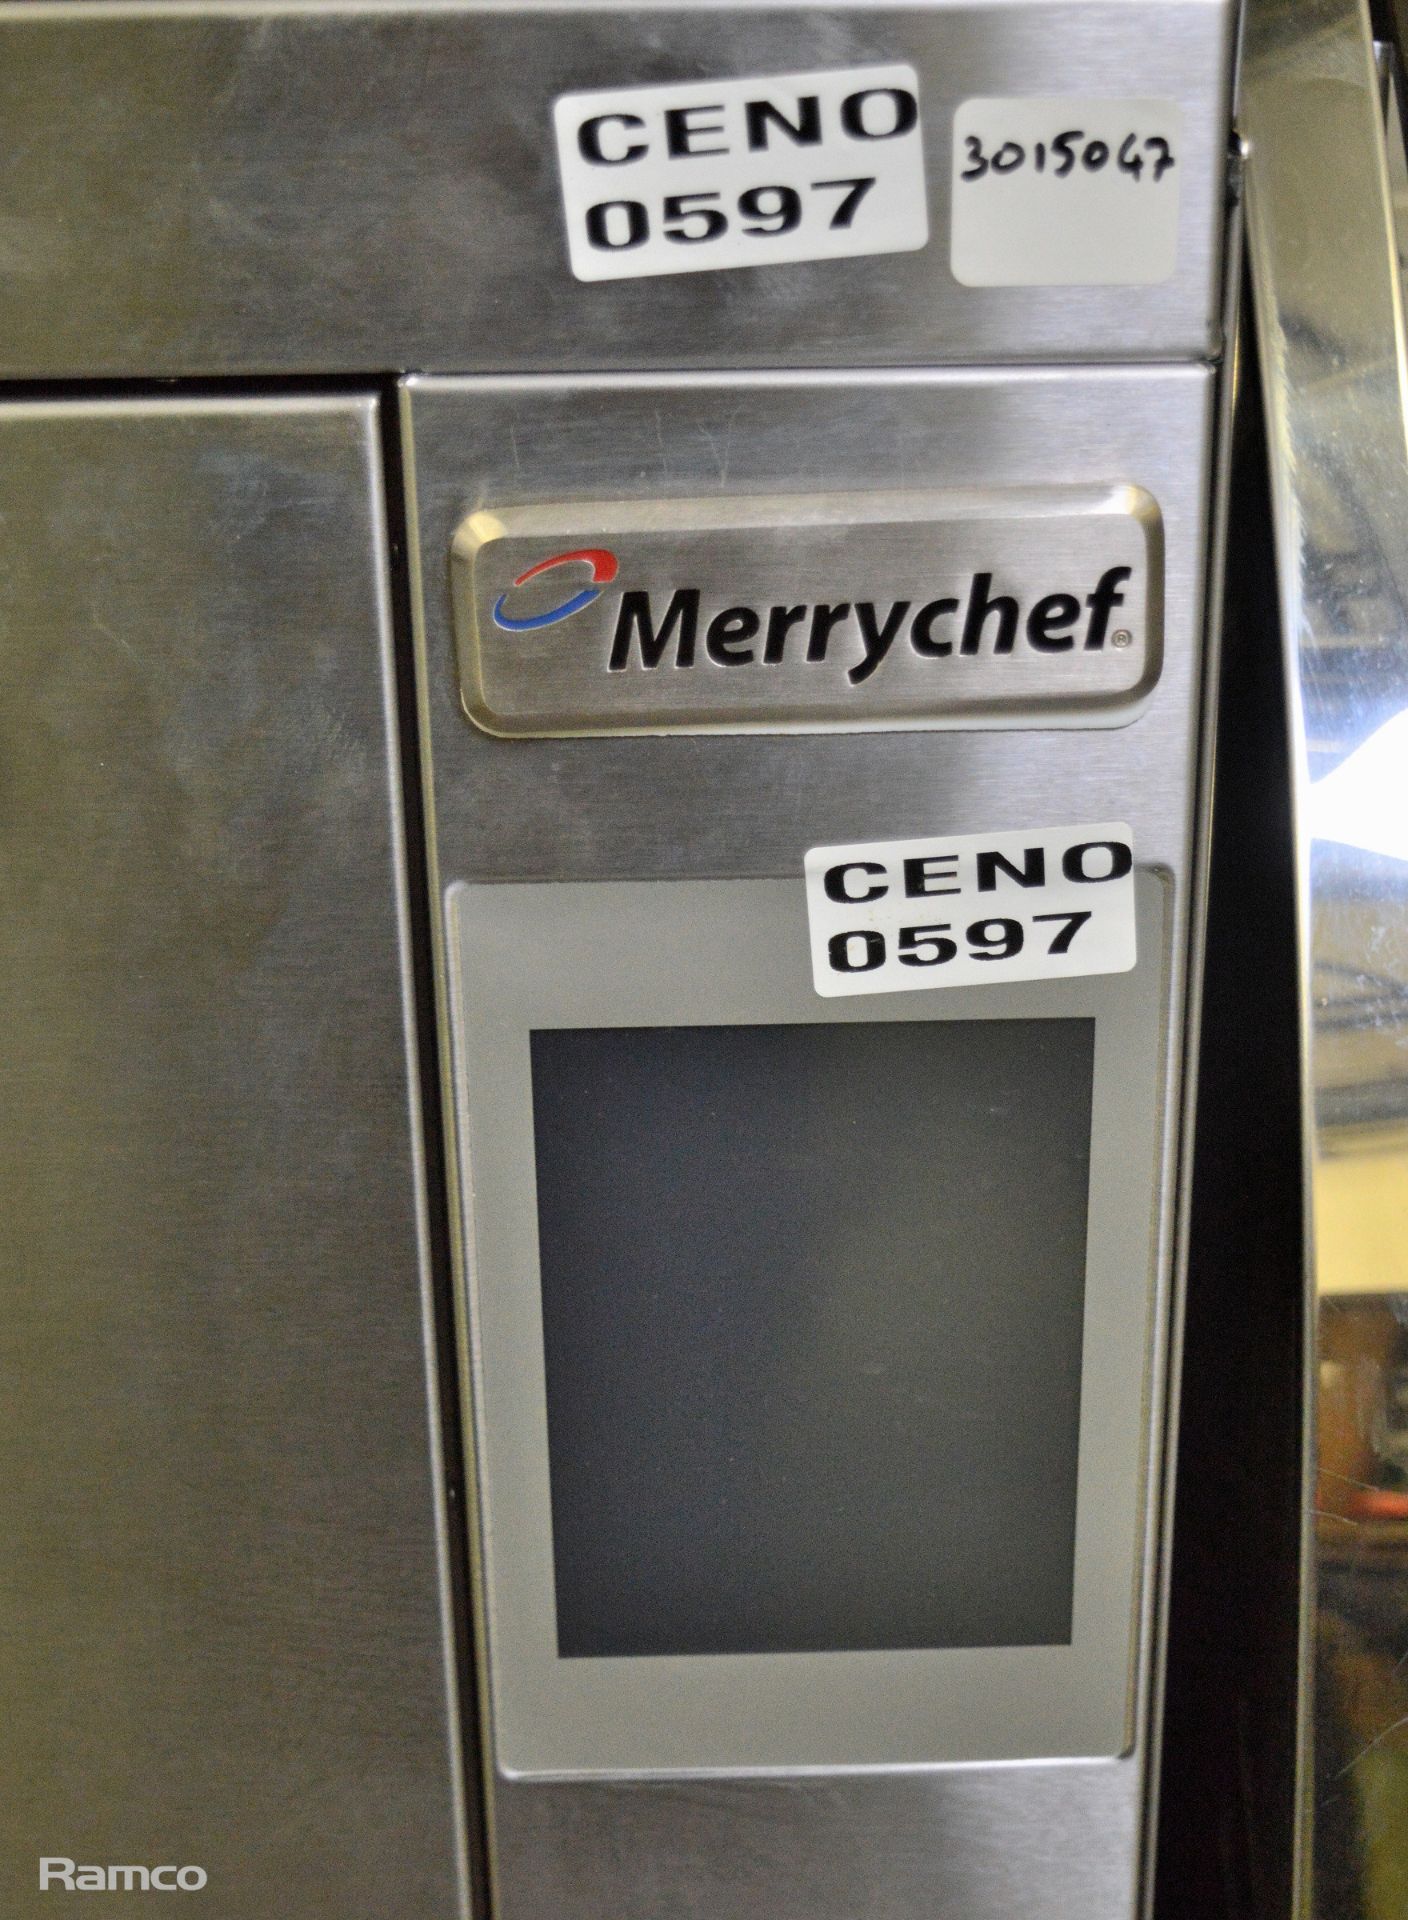 Merrychef Eikon E3 High Speed Oven - L 570mm x W 600mm x H 550mm with Baking Trays and Ins - Image 7 of 9